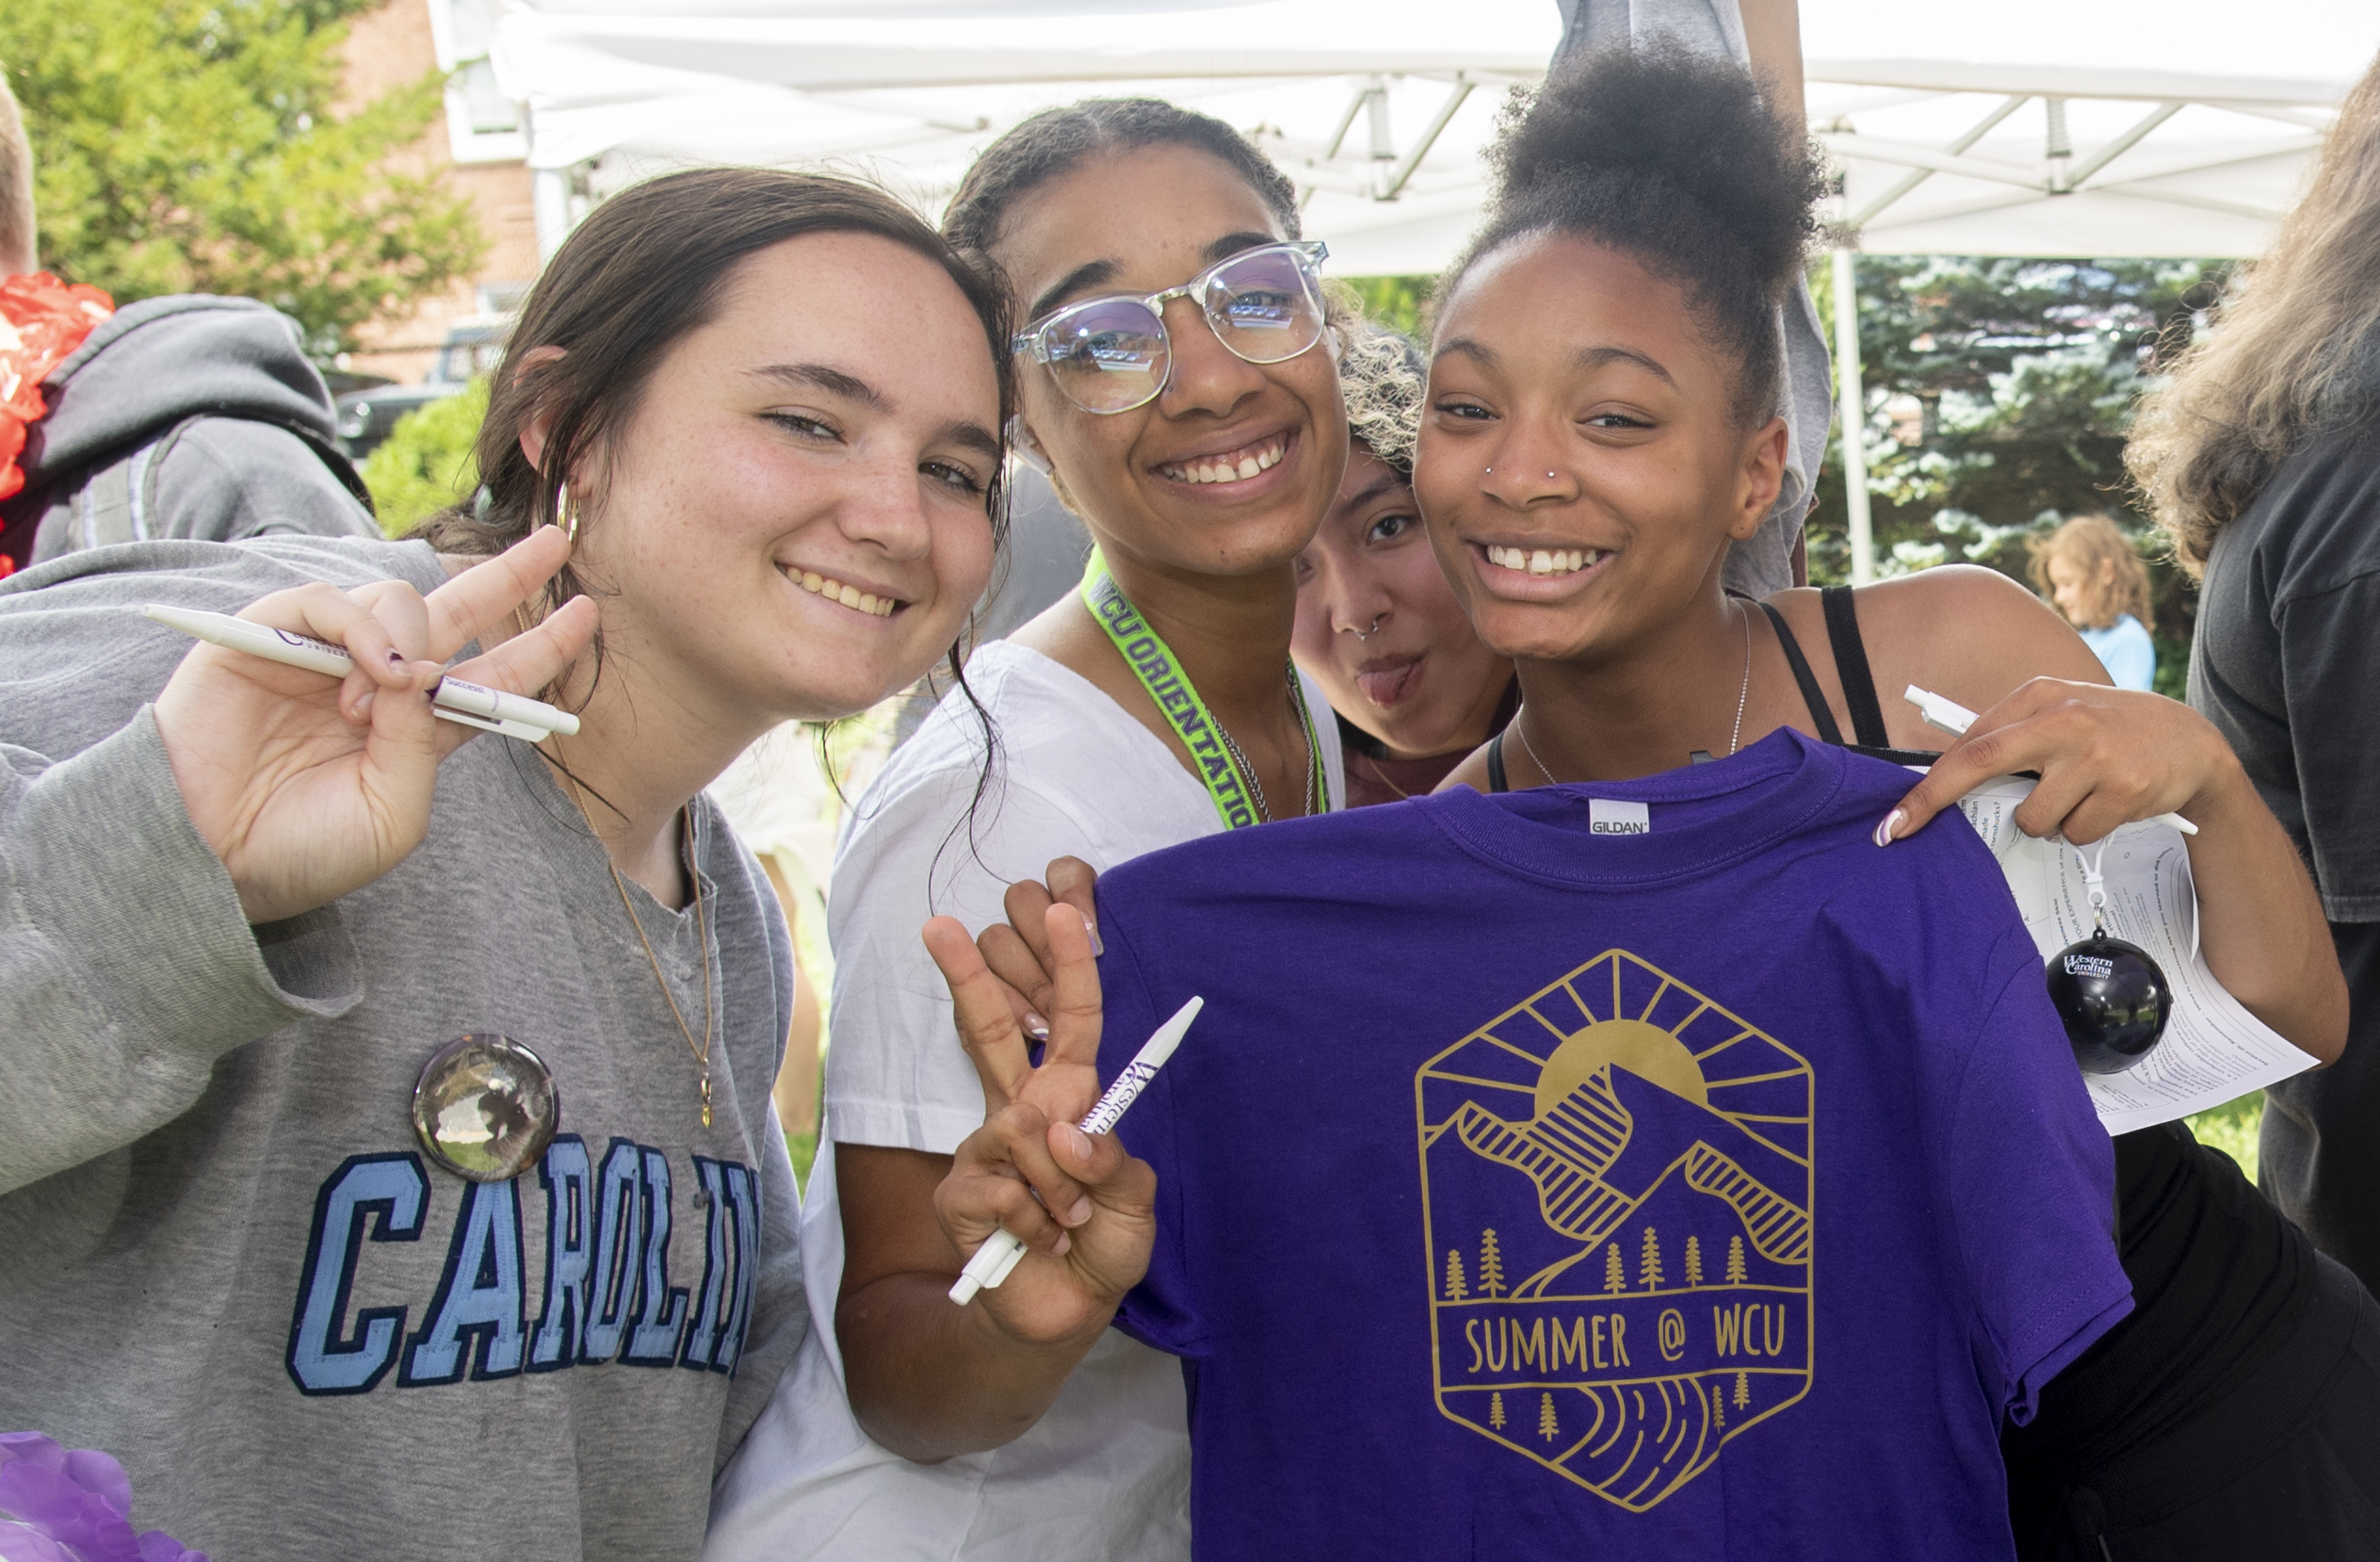 Students posing with Summer t-shirt